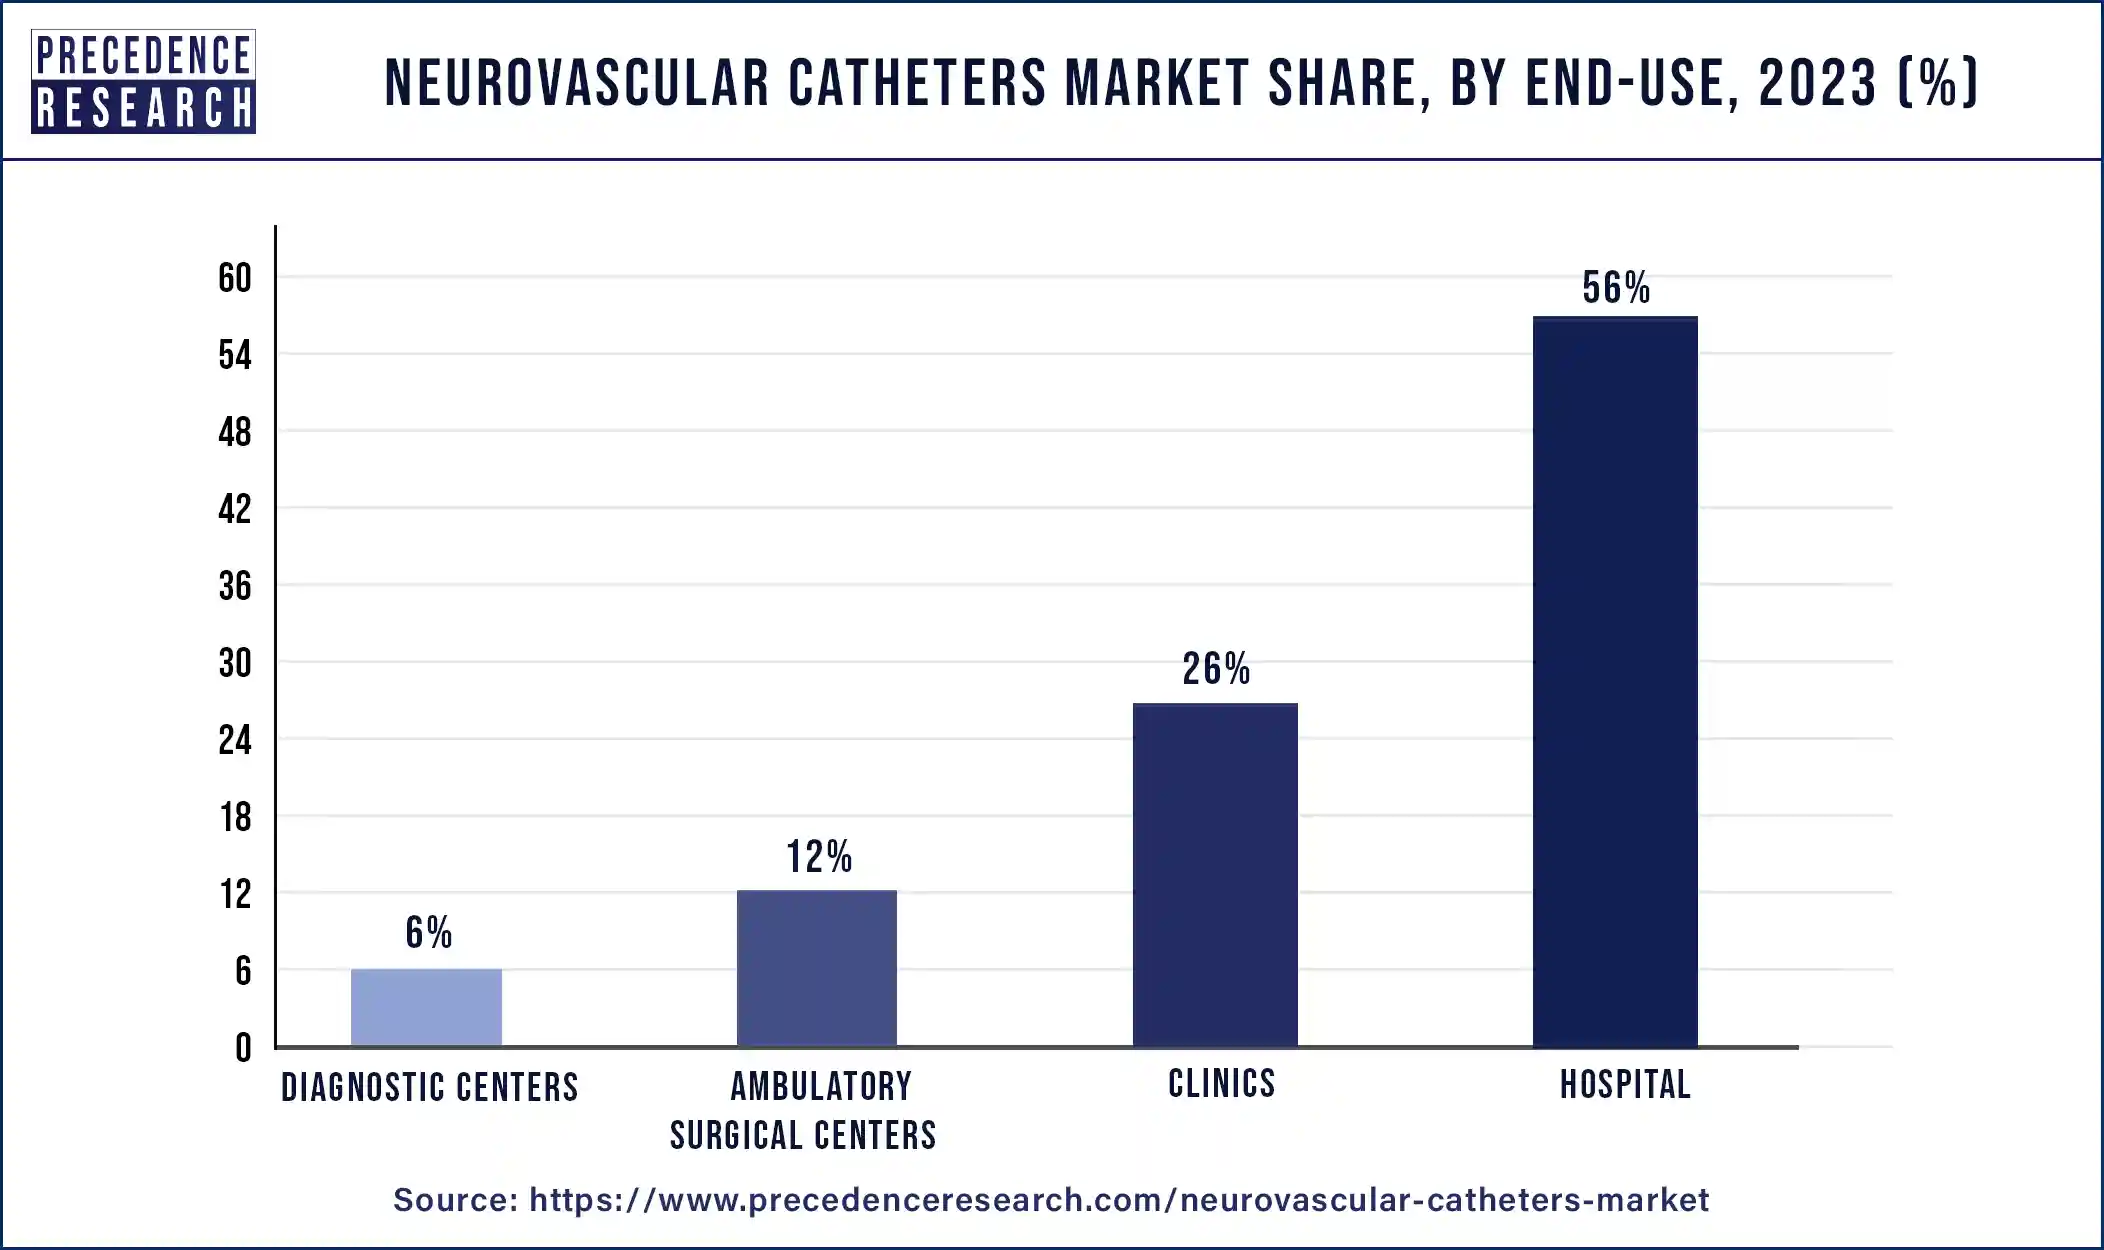 Neurovascular Catheters Market Share, By End-Use, 2023 (%)